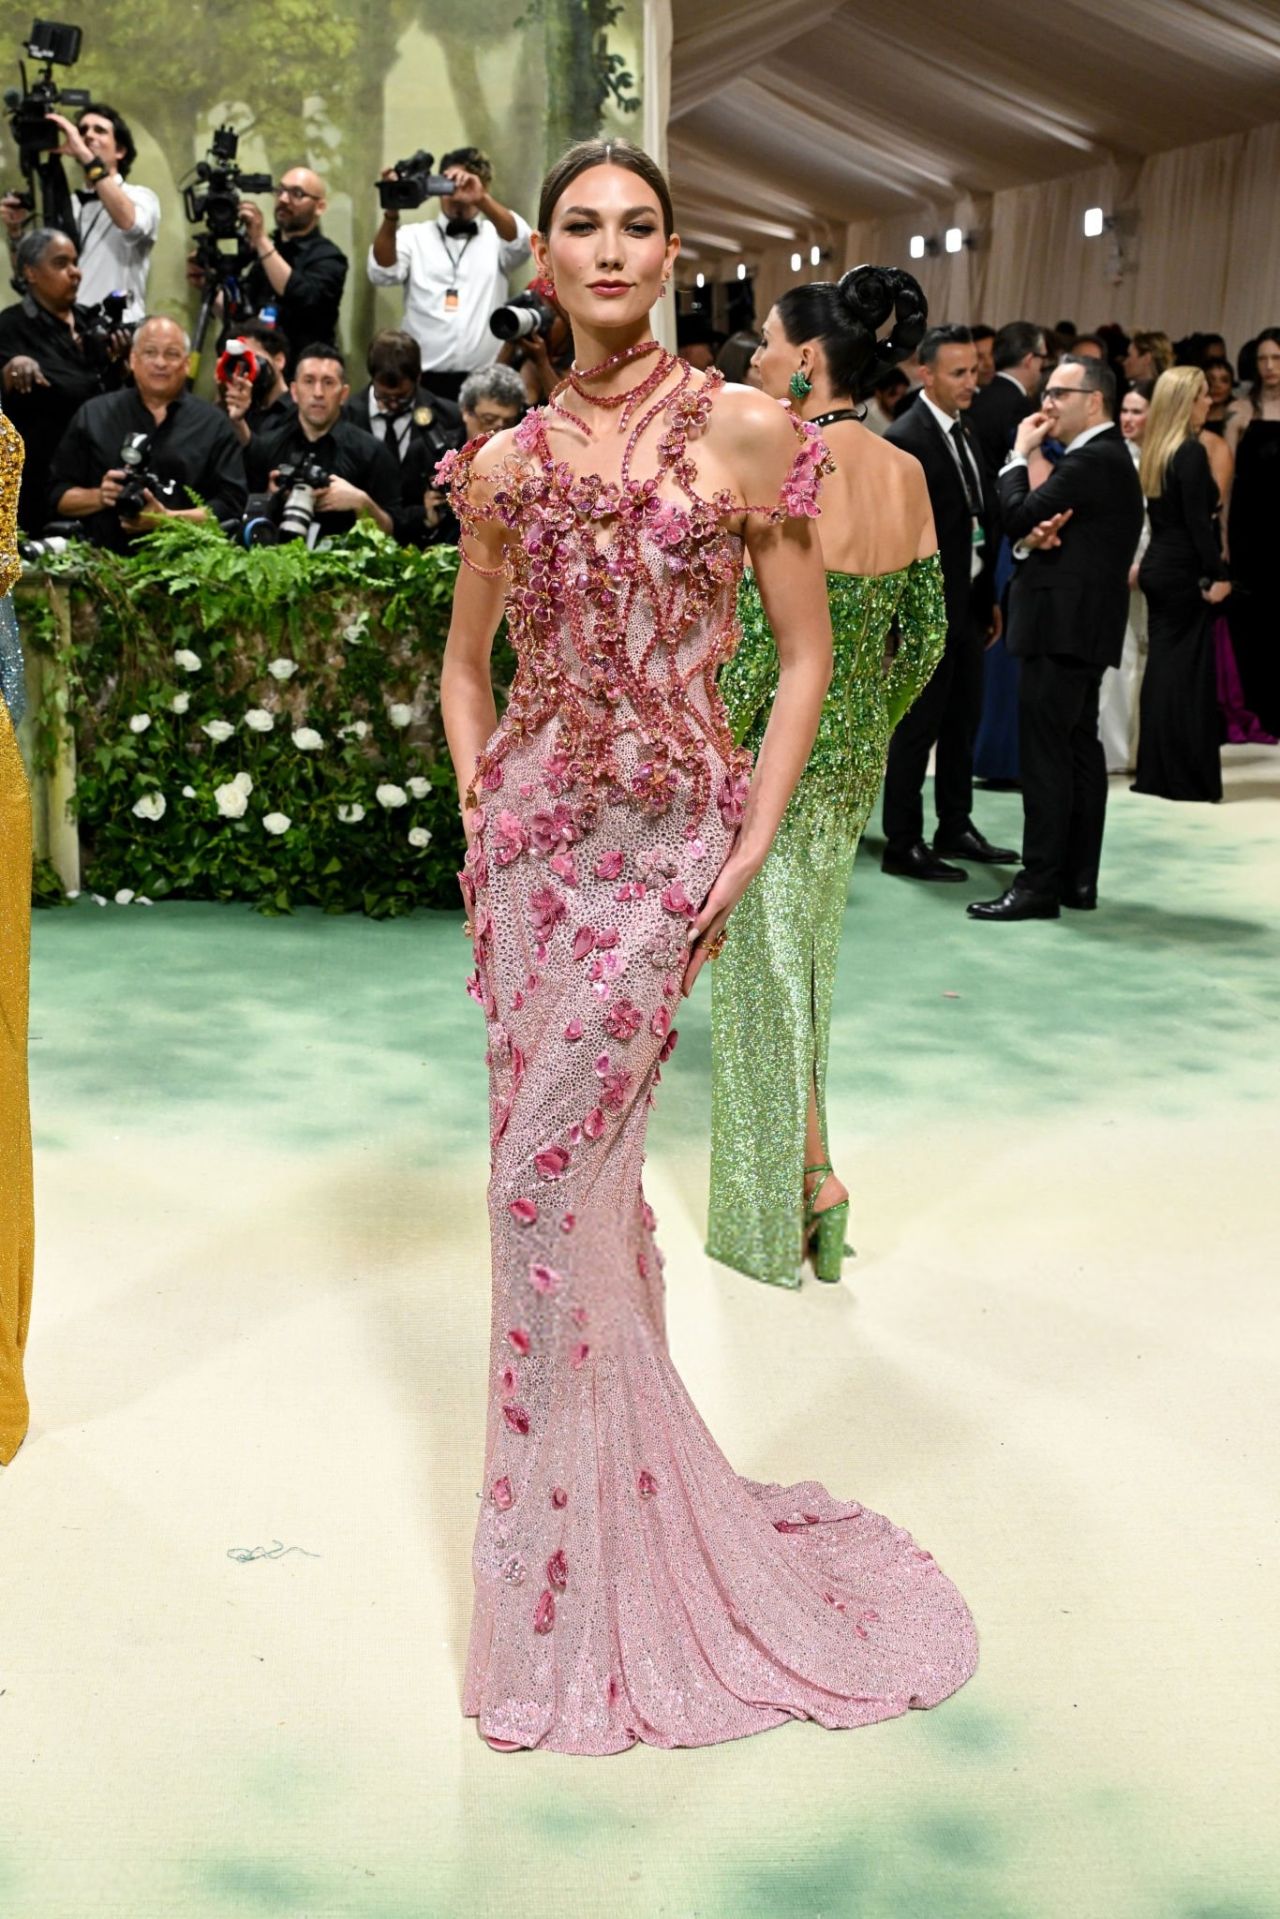 Karlie Kloss in Pink Bejeweled Gown at the Met Gala in New York ...